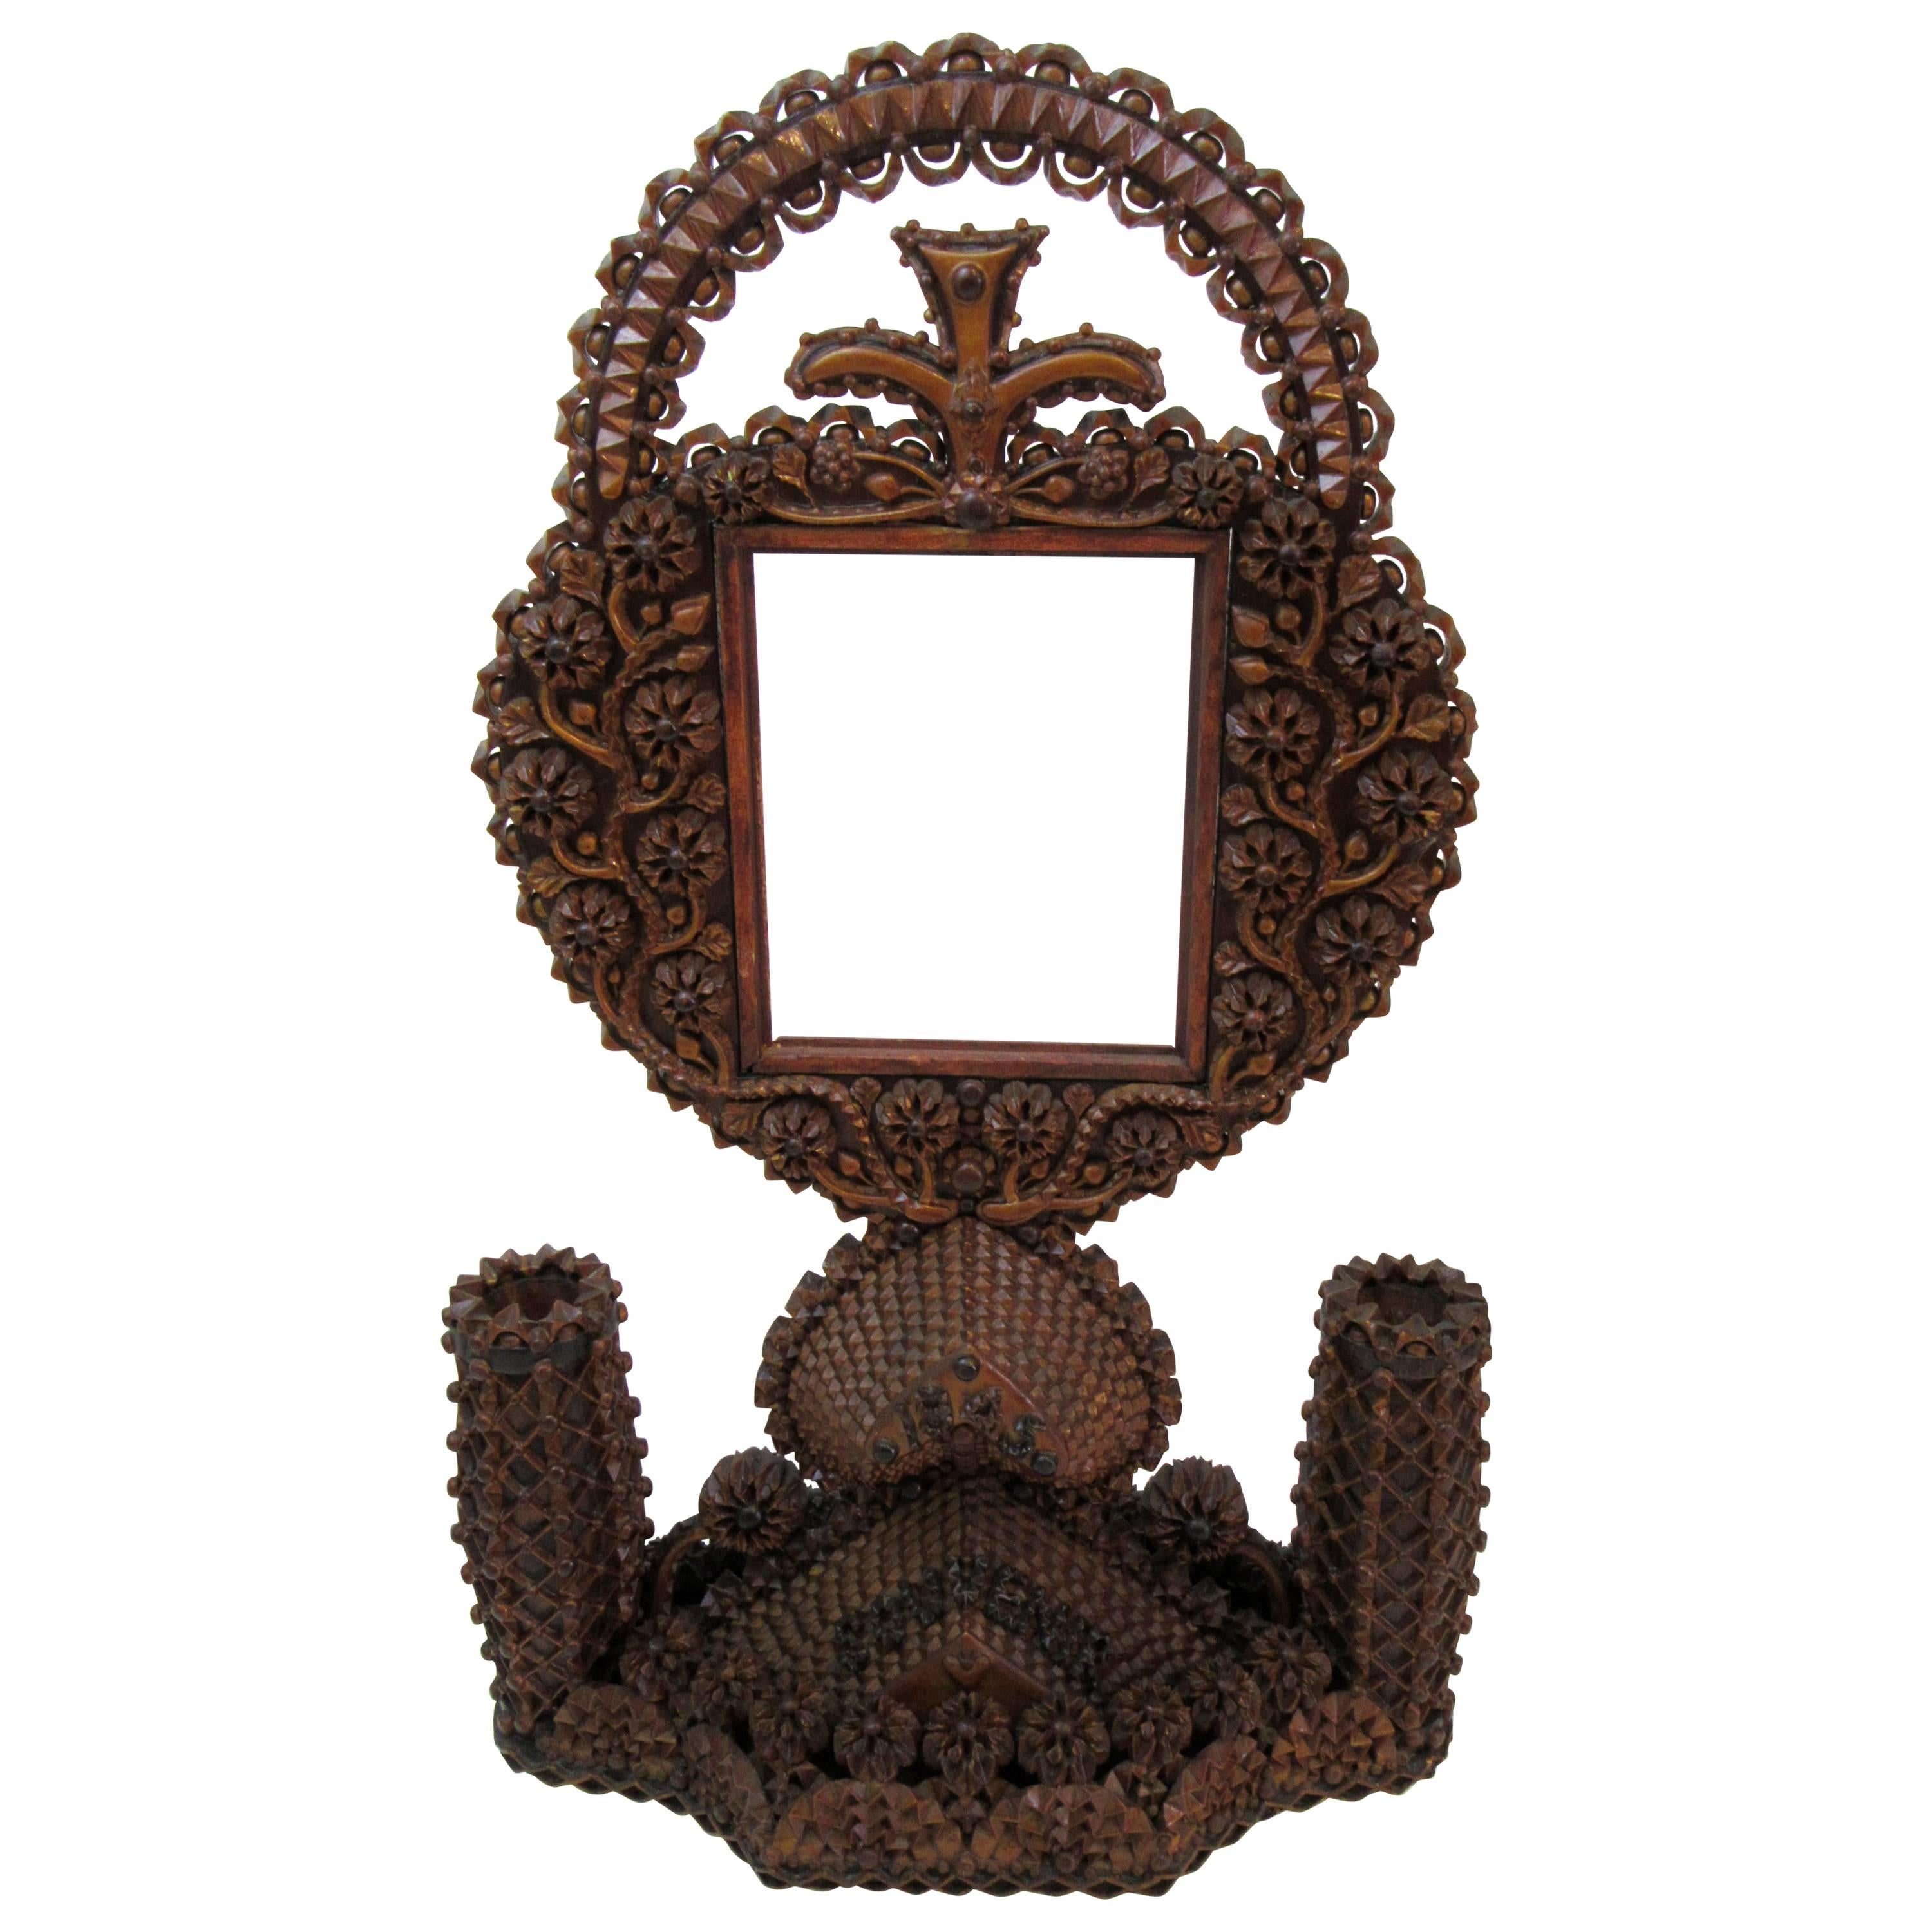 Sculptural Tramp Art Double Sided Frame and Candleholder